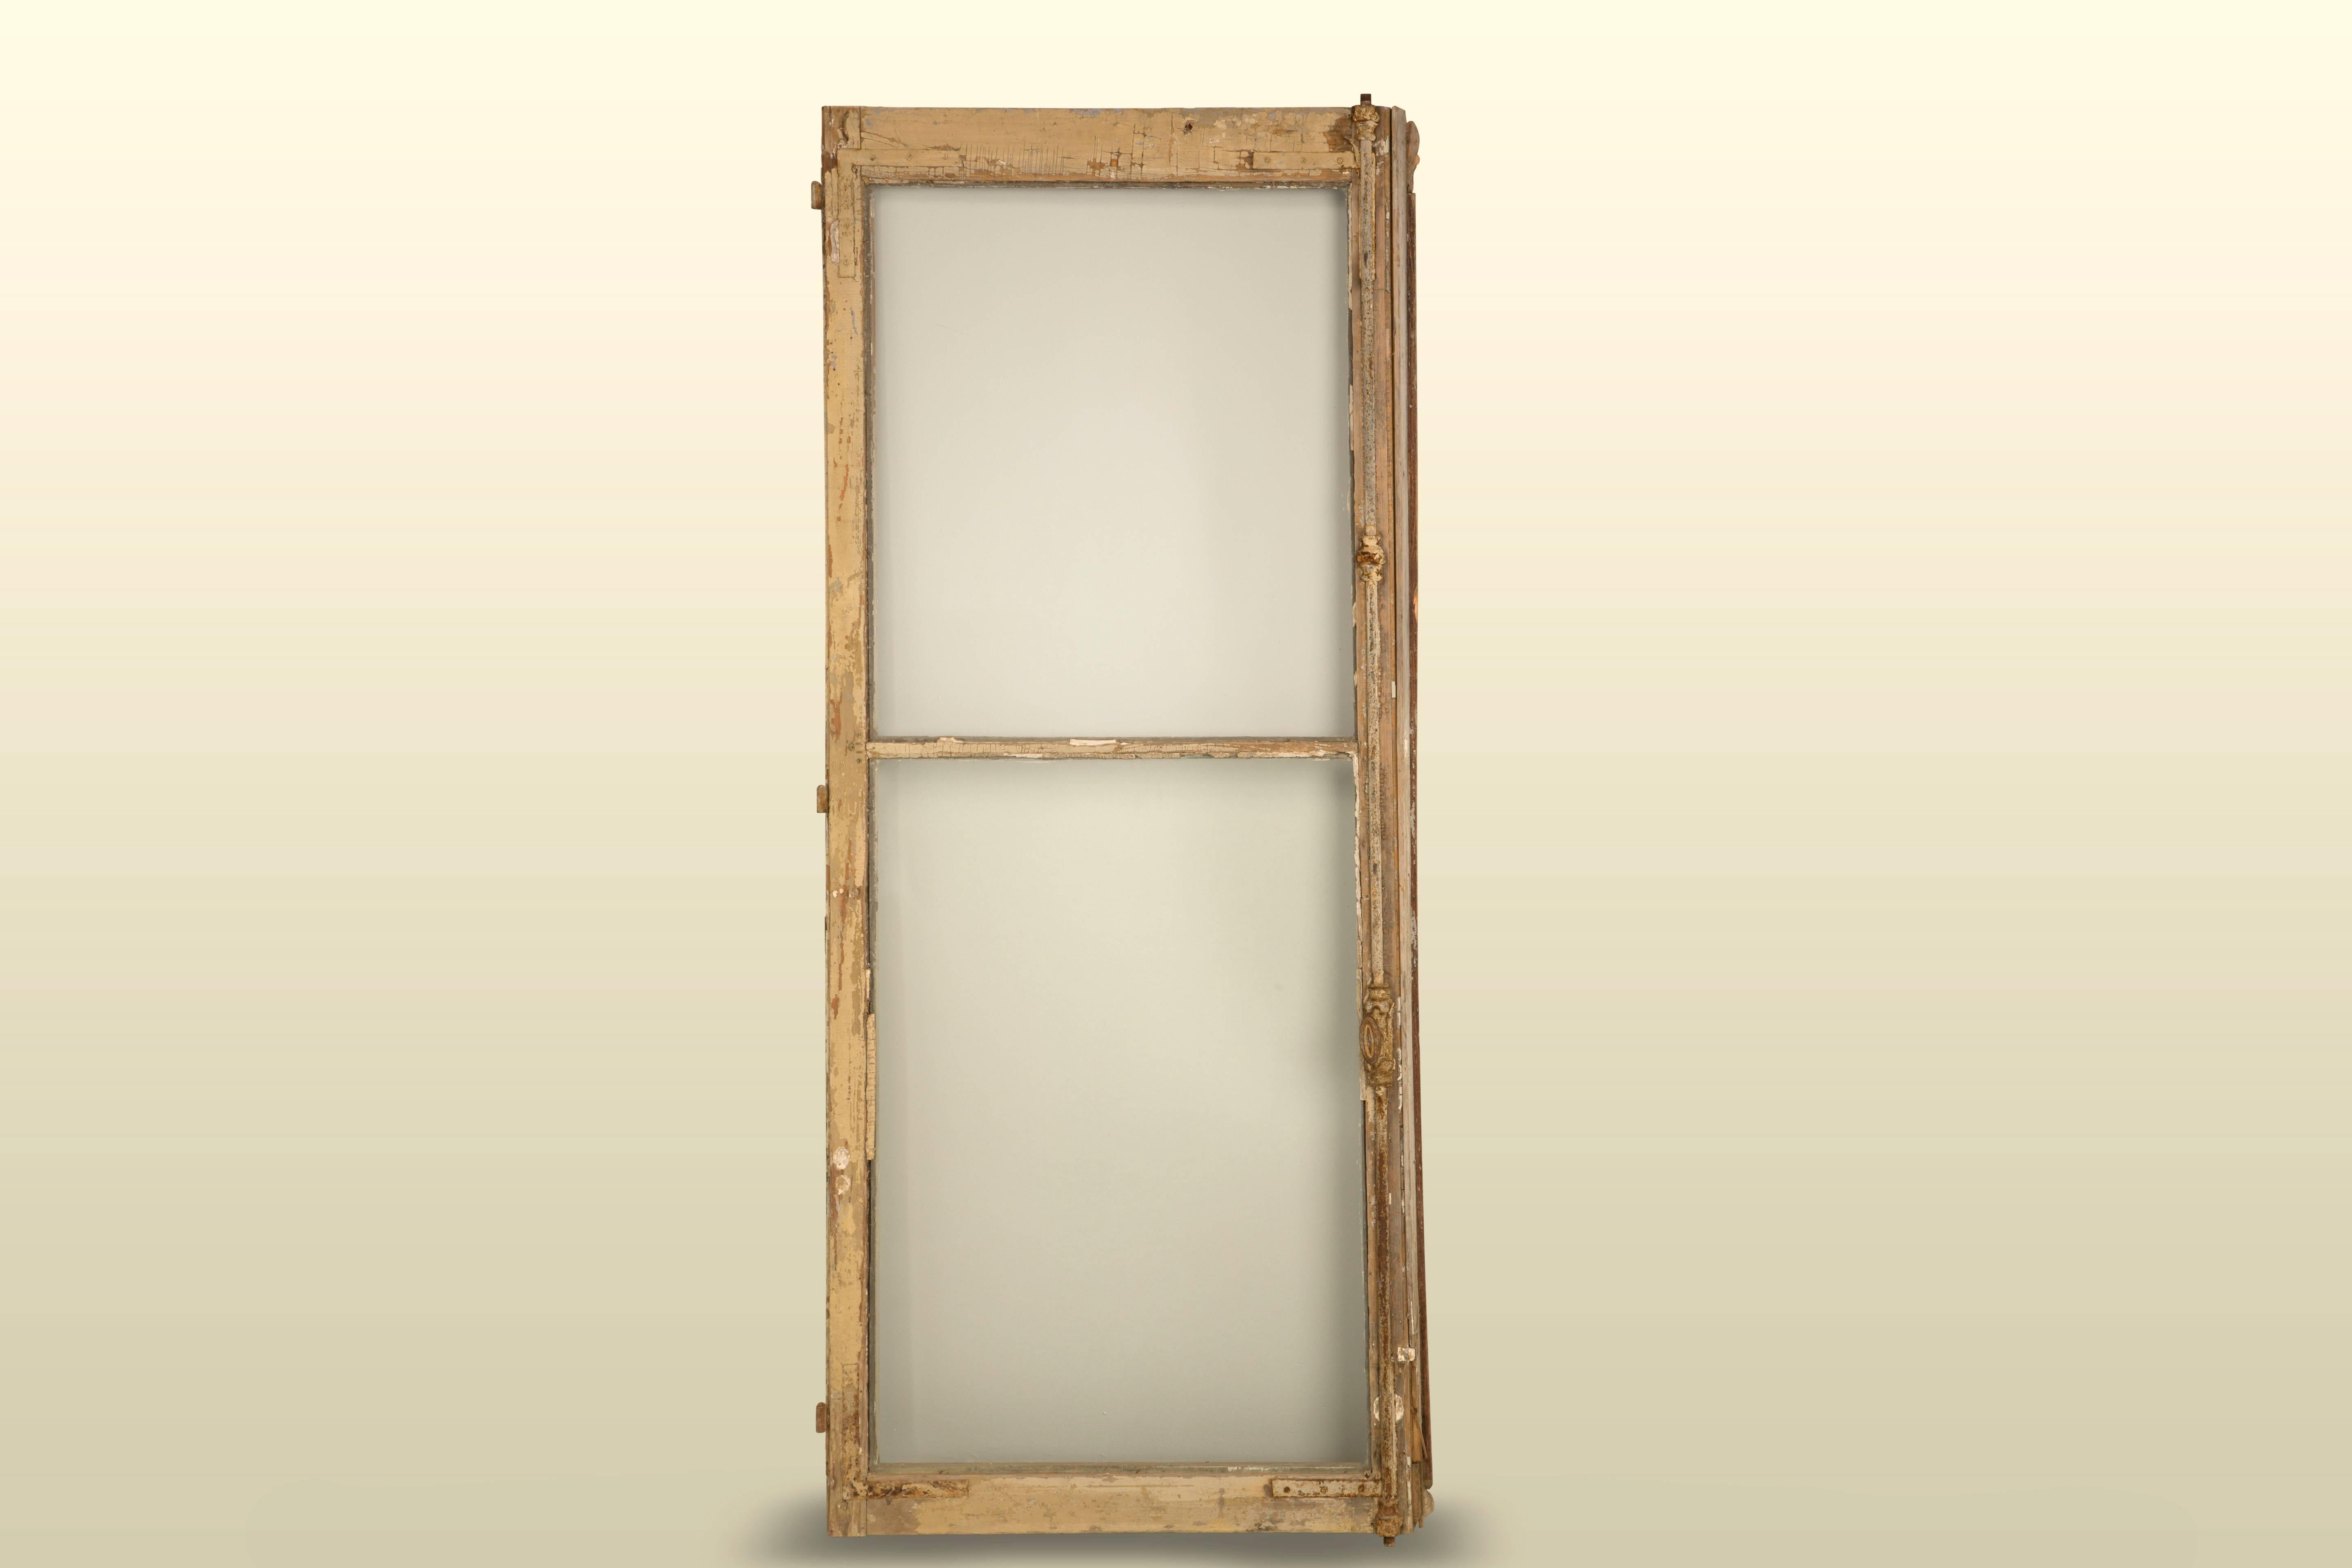 Late 19th Century Antique French Windows in Their Original Paint and Hardware, Unrestored For Sale